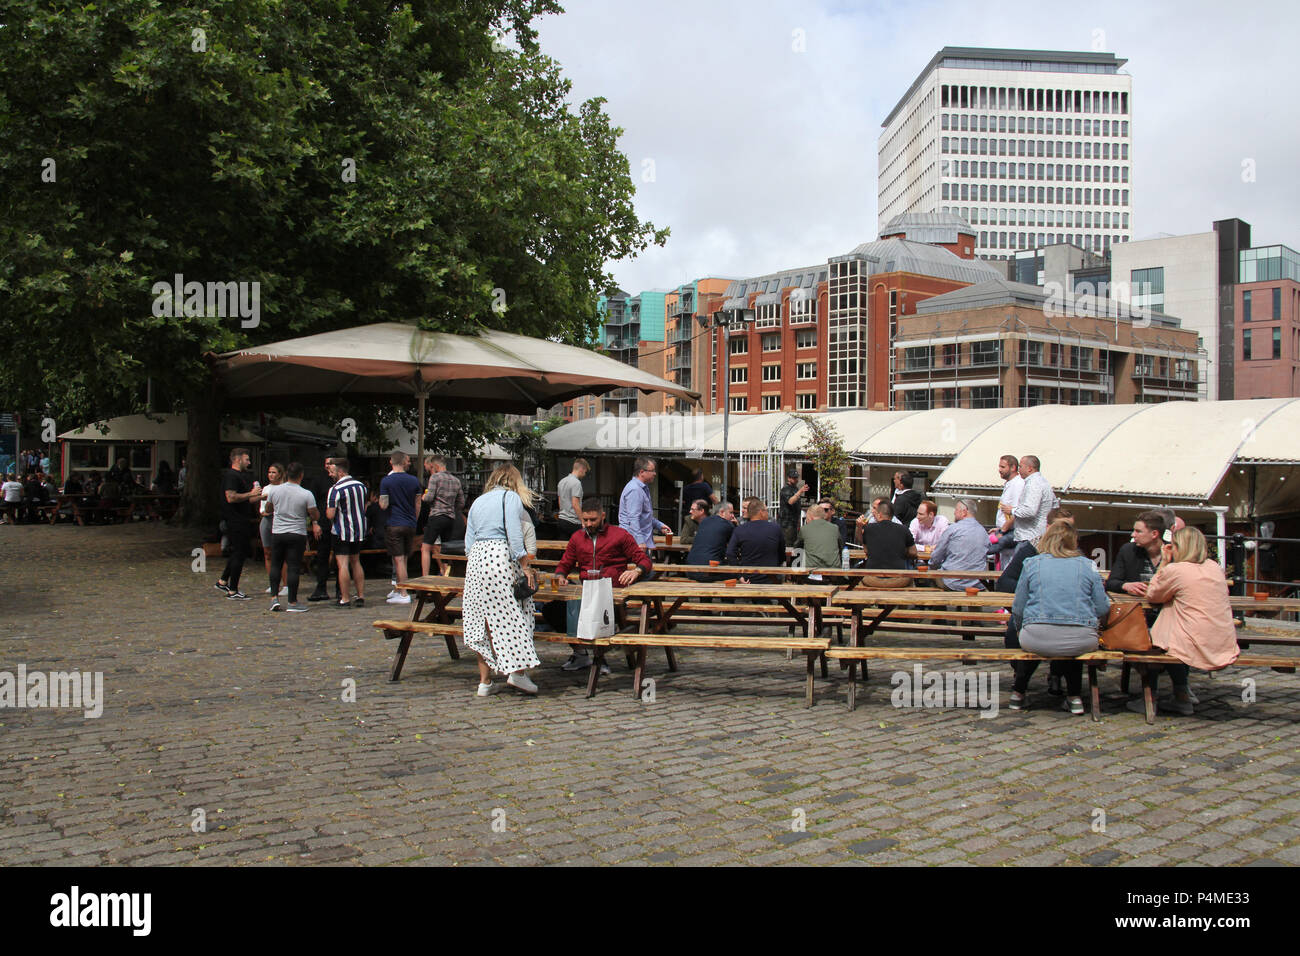 People drinking together at Queen Square, Bristol, England. Stock Photo